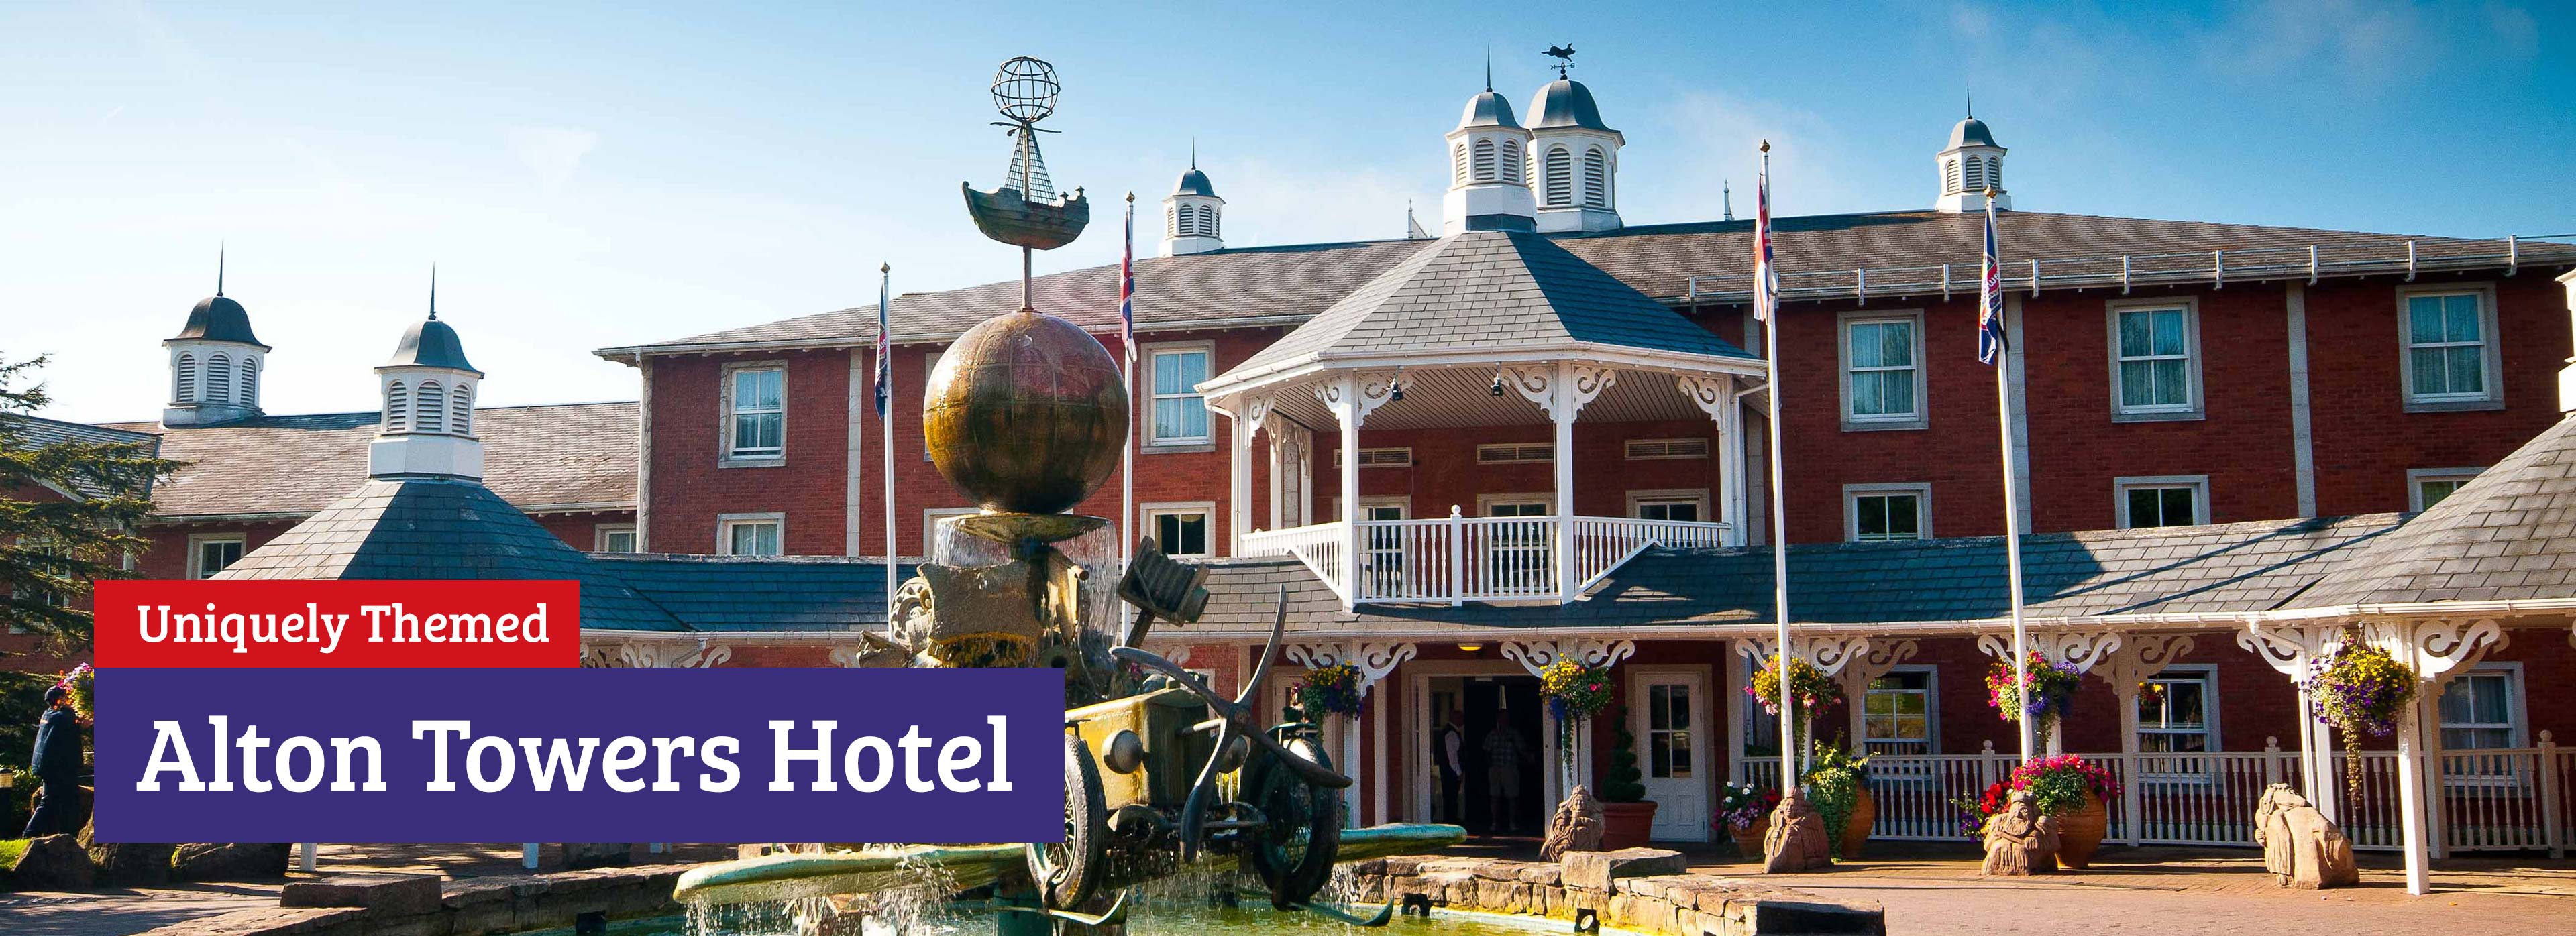 Alton Towers Hotel short breaks with Alton Towers Holidays